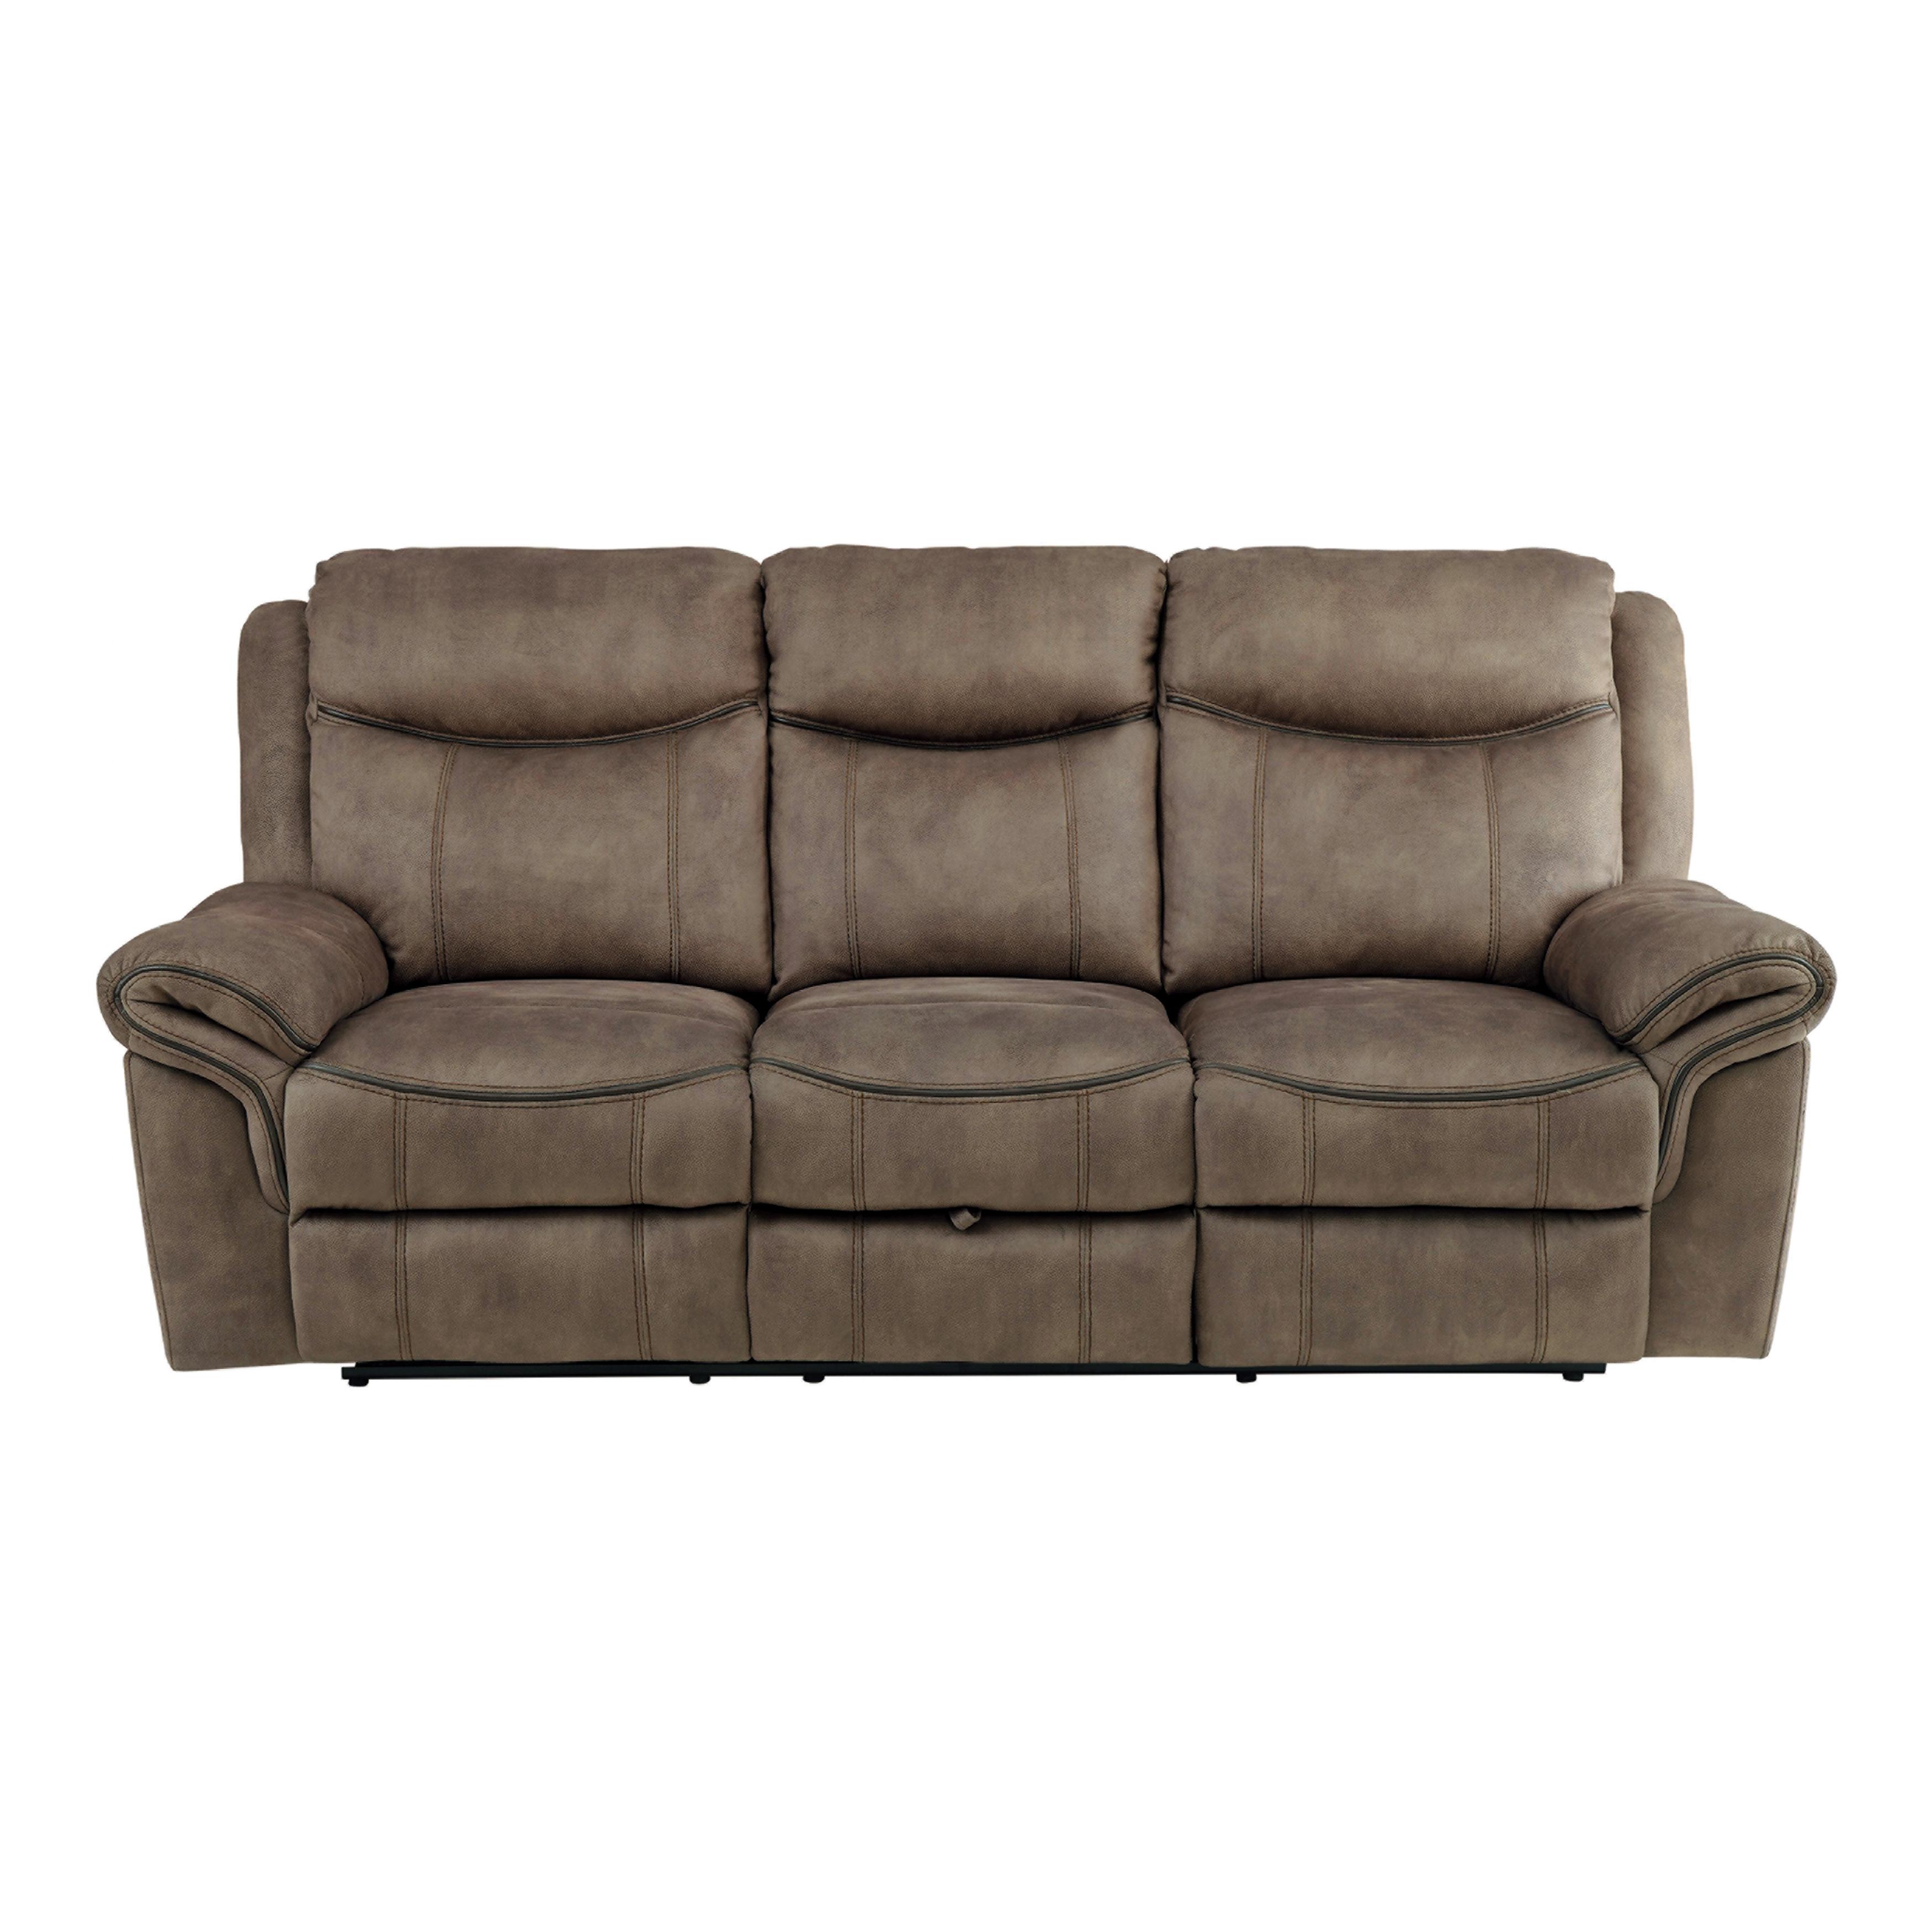 Transitional Reclining Sofa 8206NF-3 Aram 8206NF-3 in Brown Faux Leather